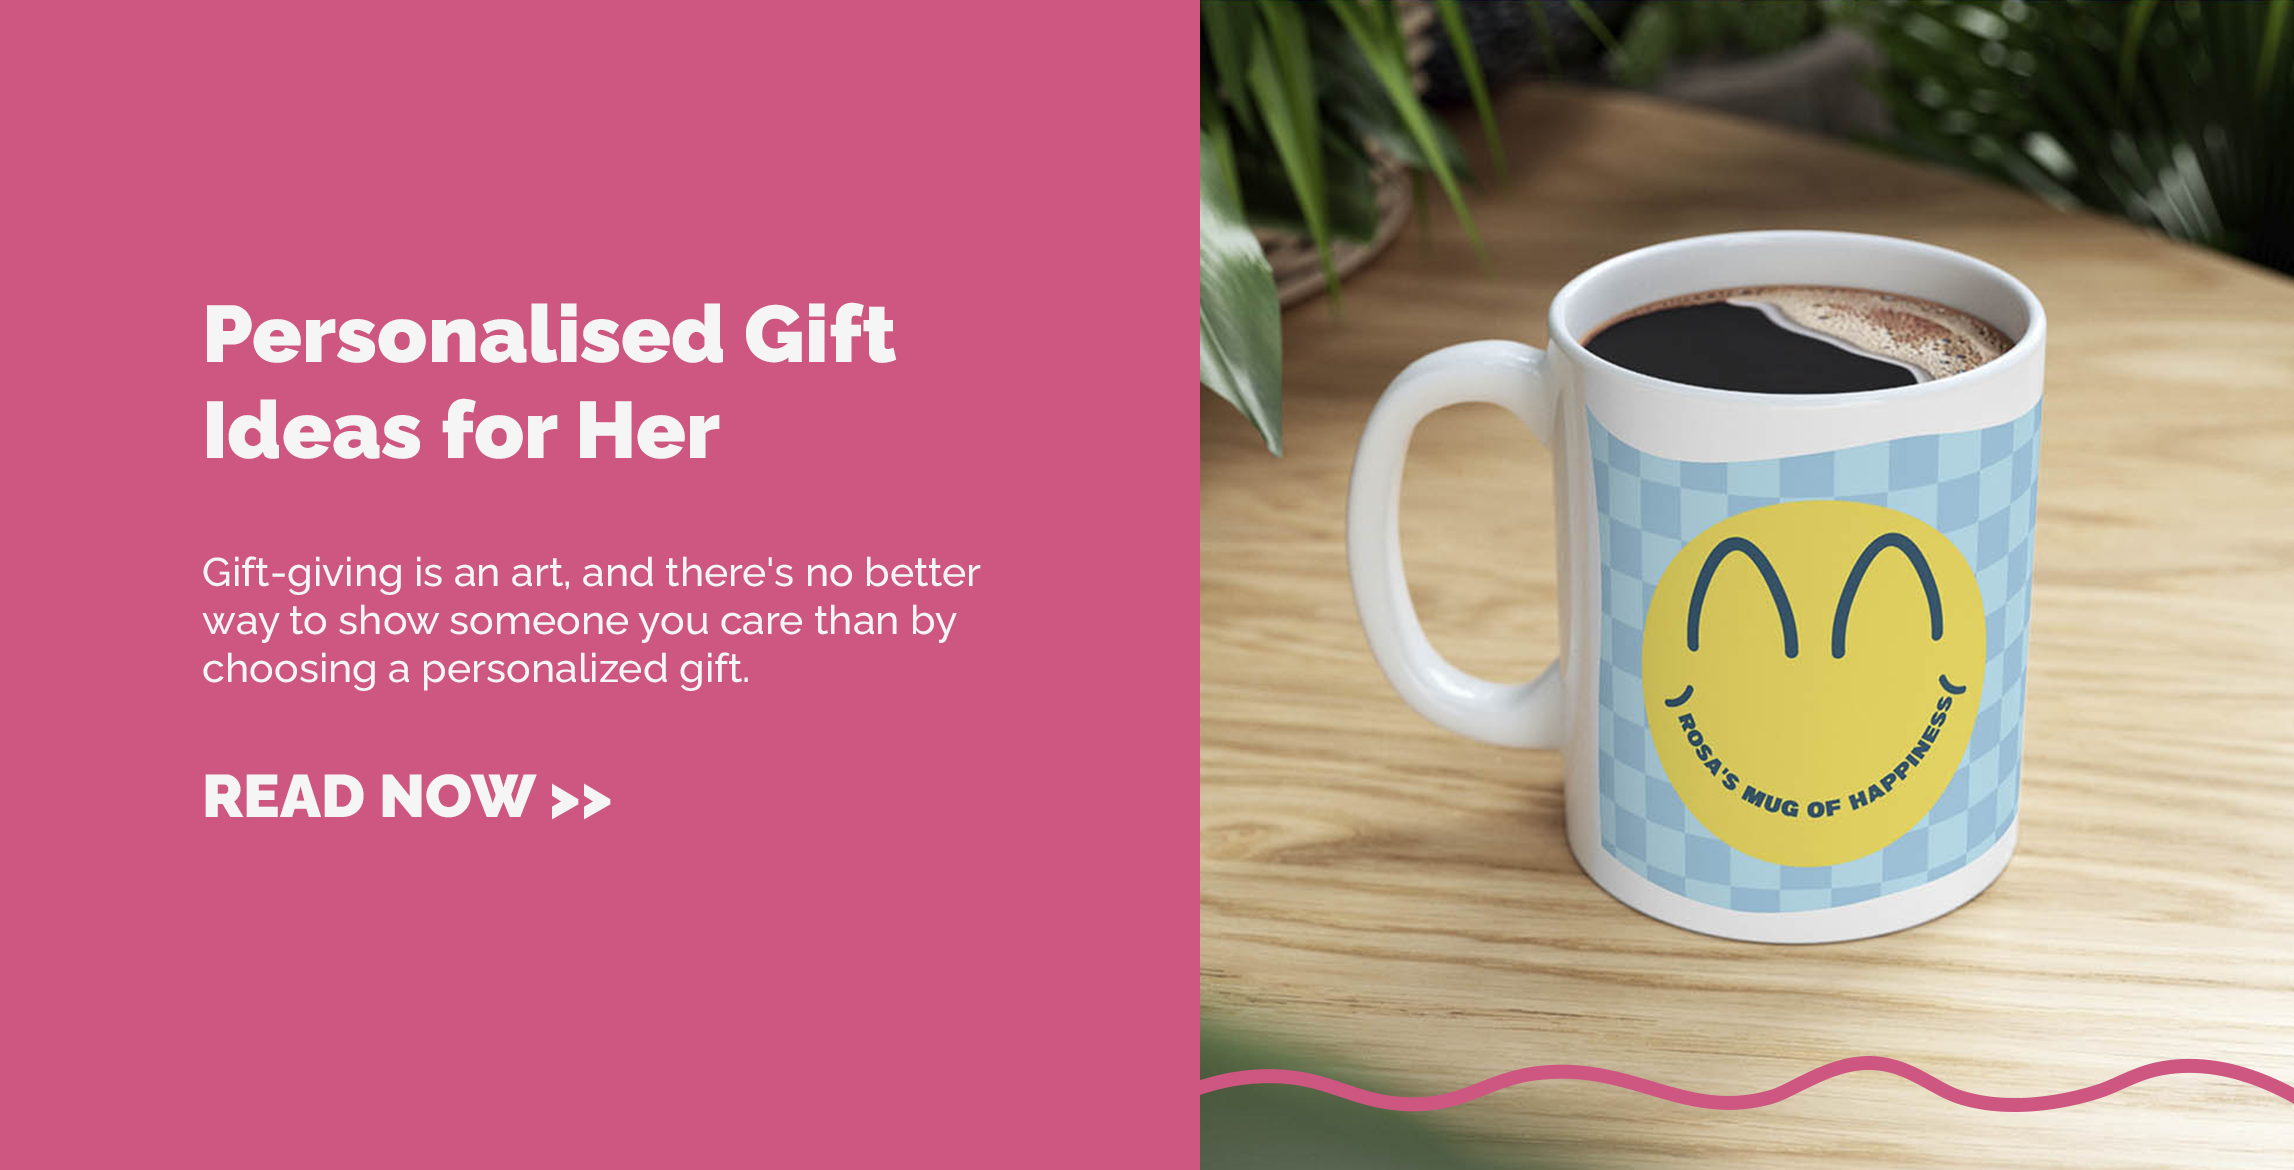 Personalised Gift Ideas for Her: What are the best personalised gifts